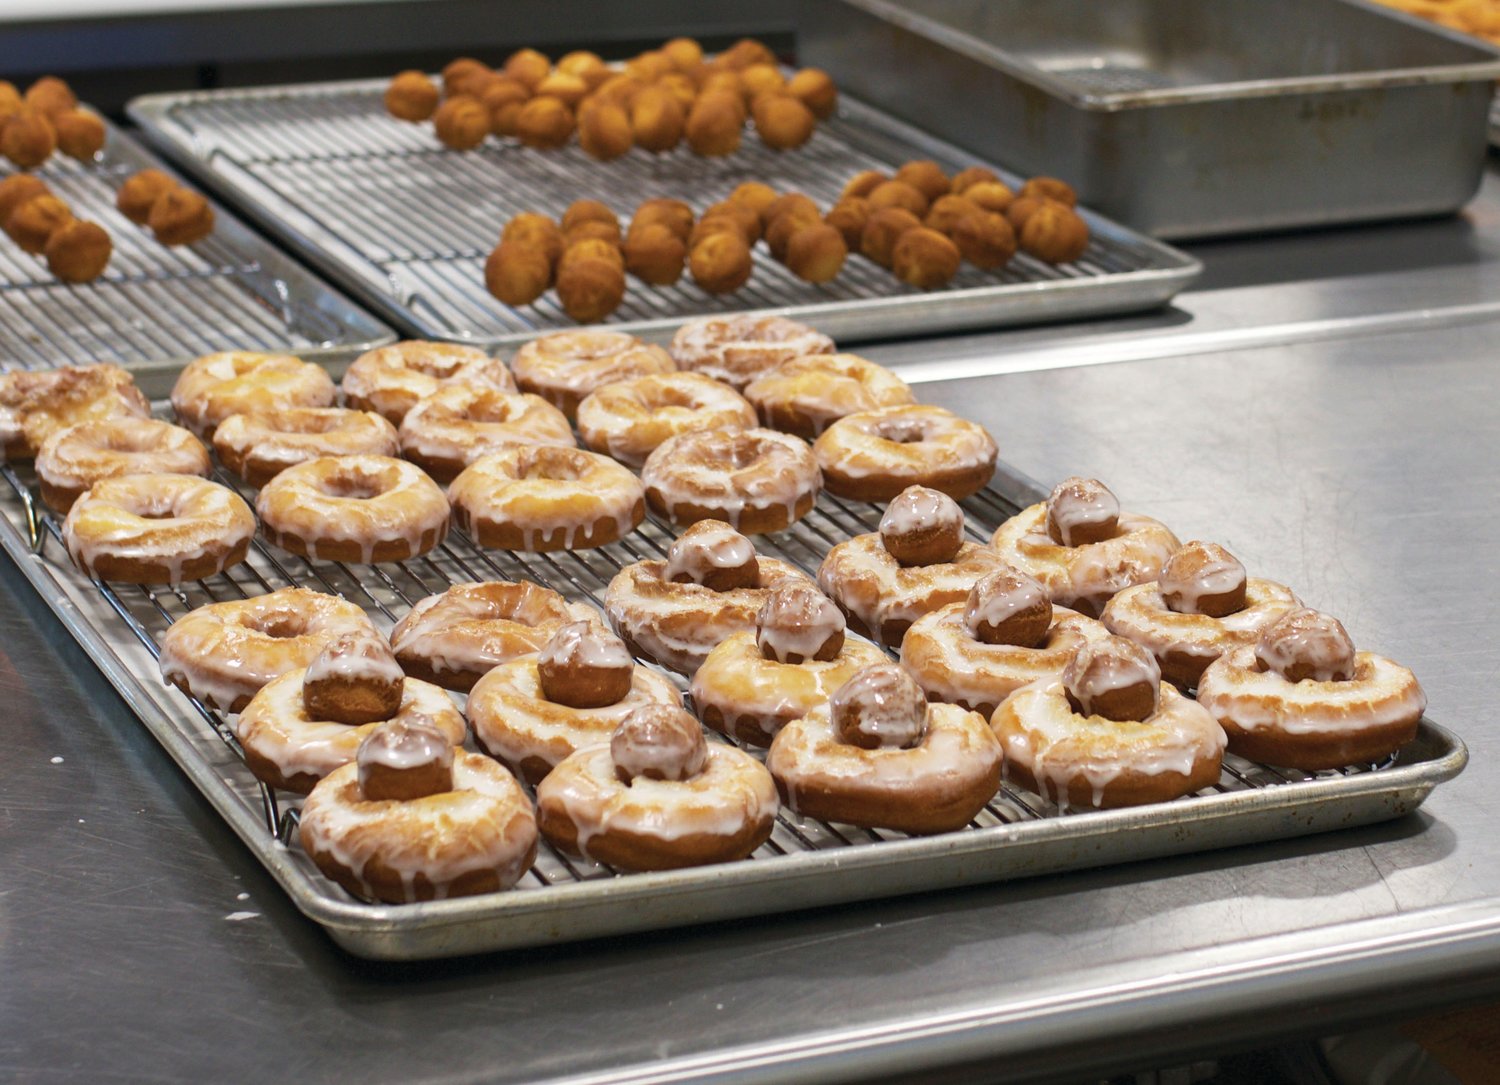 Freshly made donuts are laid out in preparation for being sold and boxed.